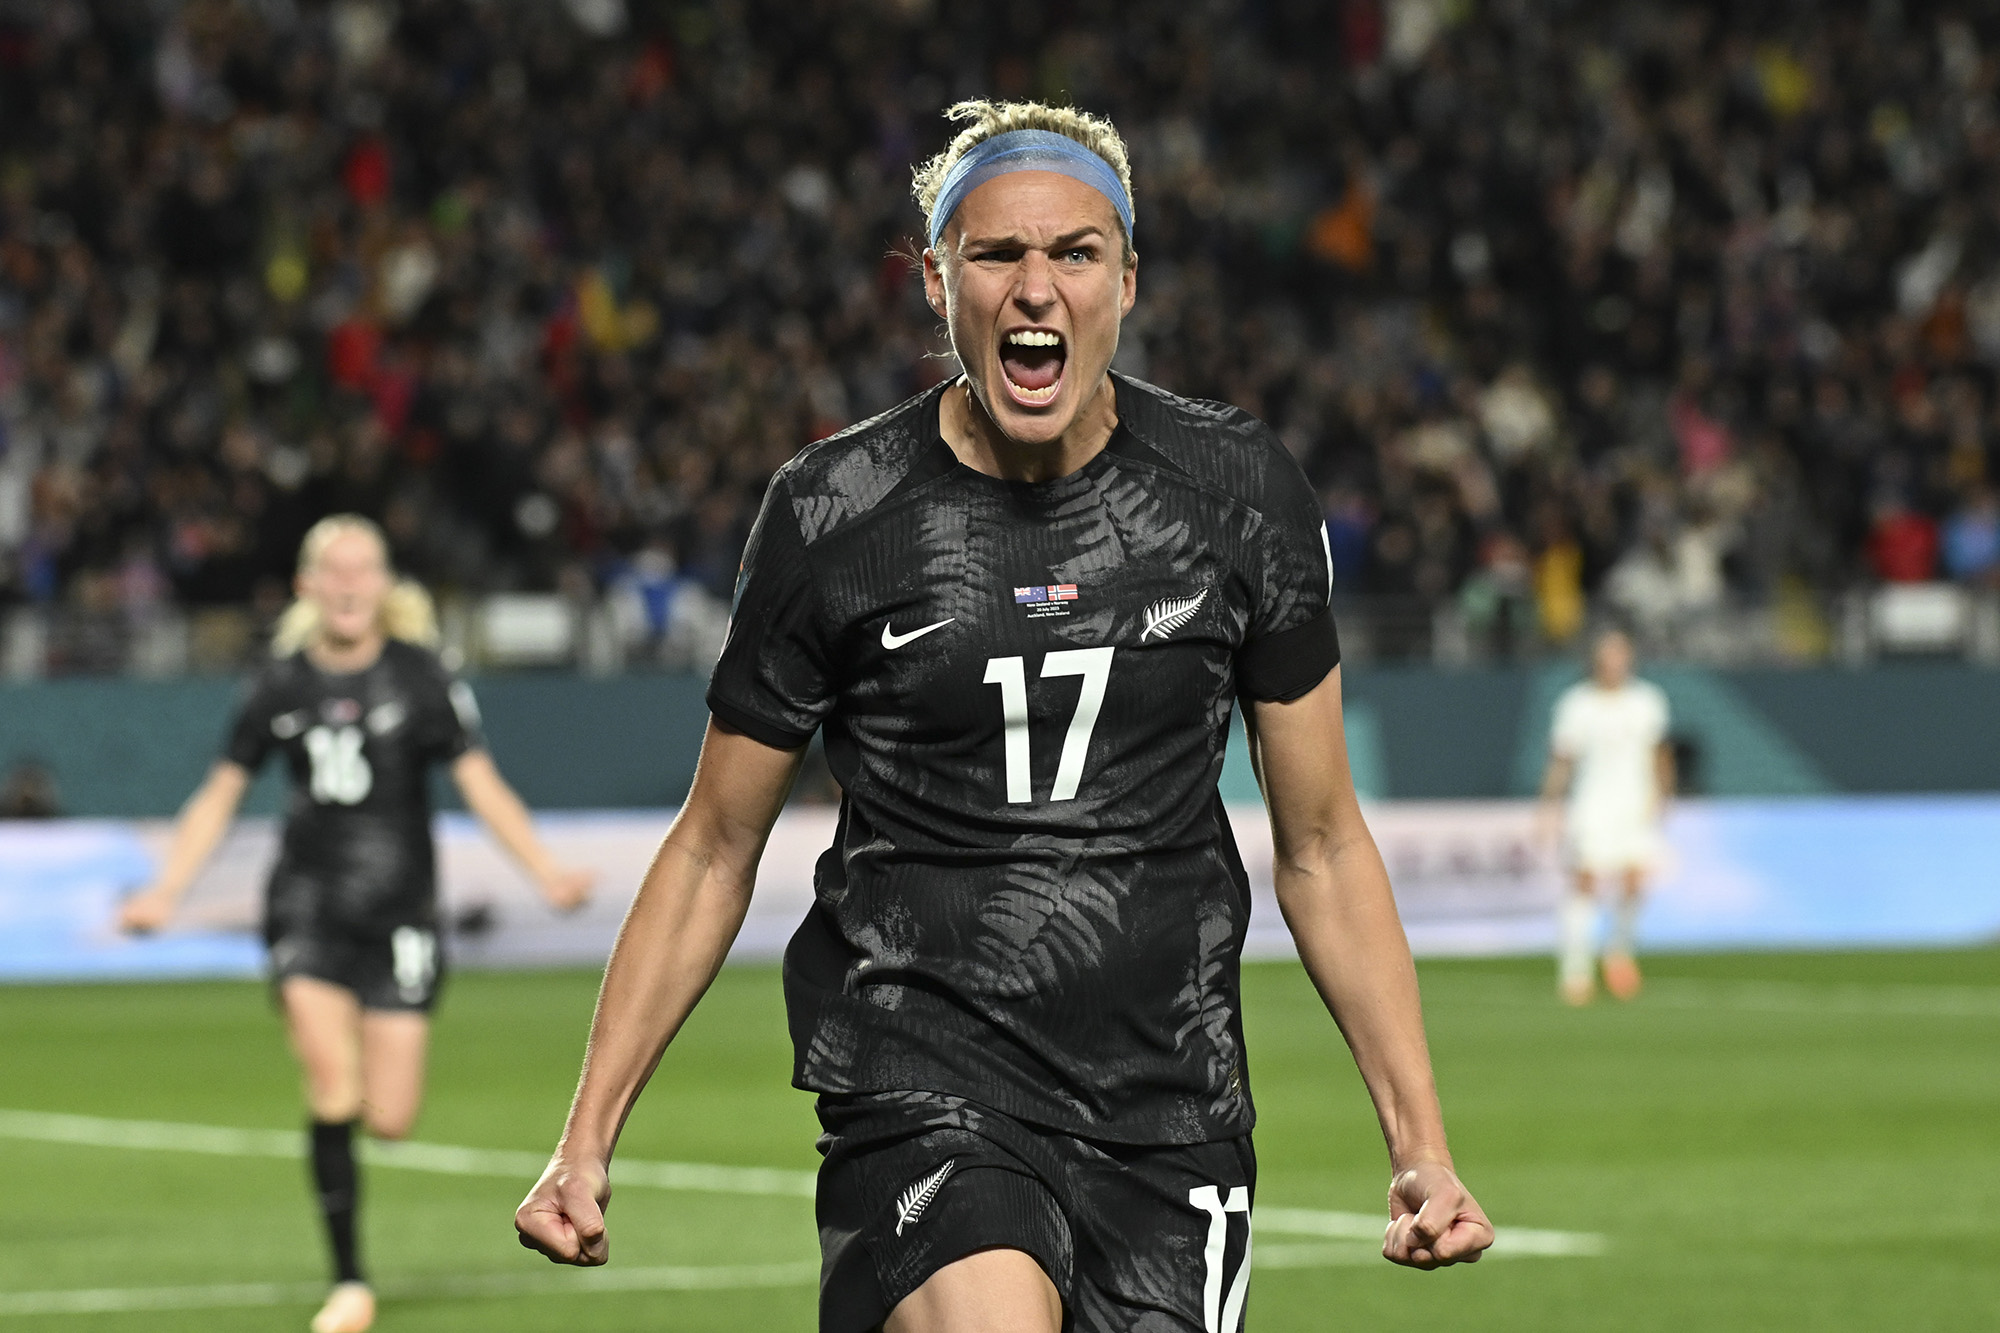 New Zealand's Hannah Wilkinson celebrates after scoring the opening goal during the Women's World Cup soccer match between New Zealand and Norway in Auckland, New Zealand, on July 20.